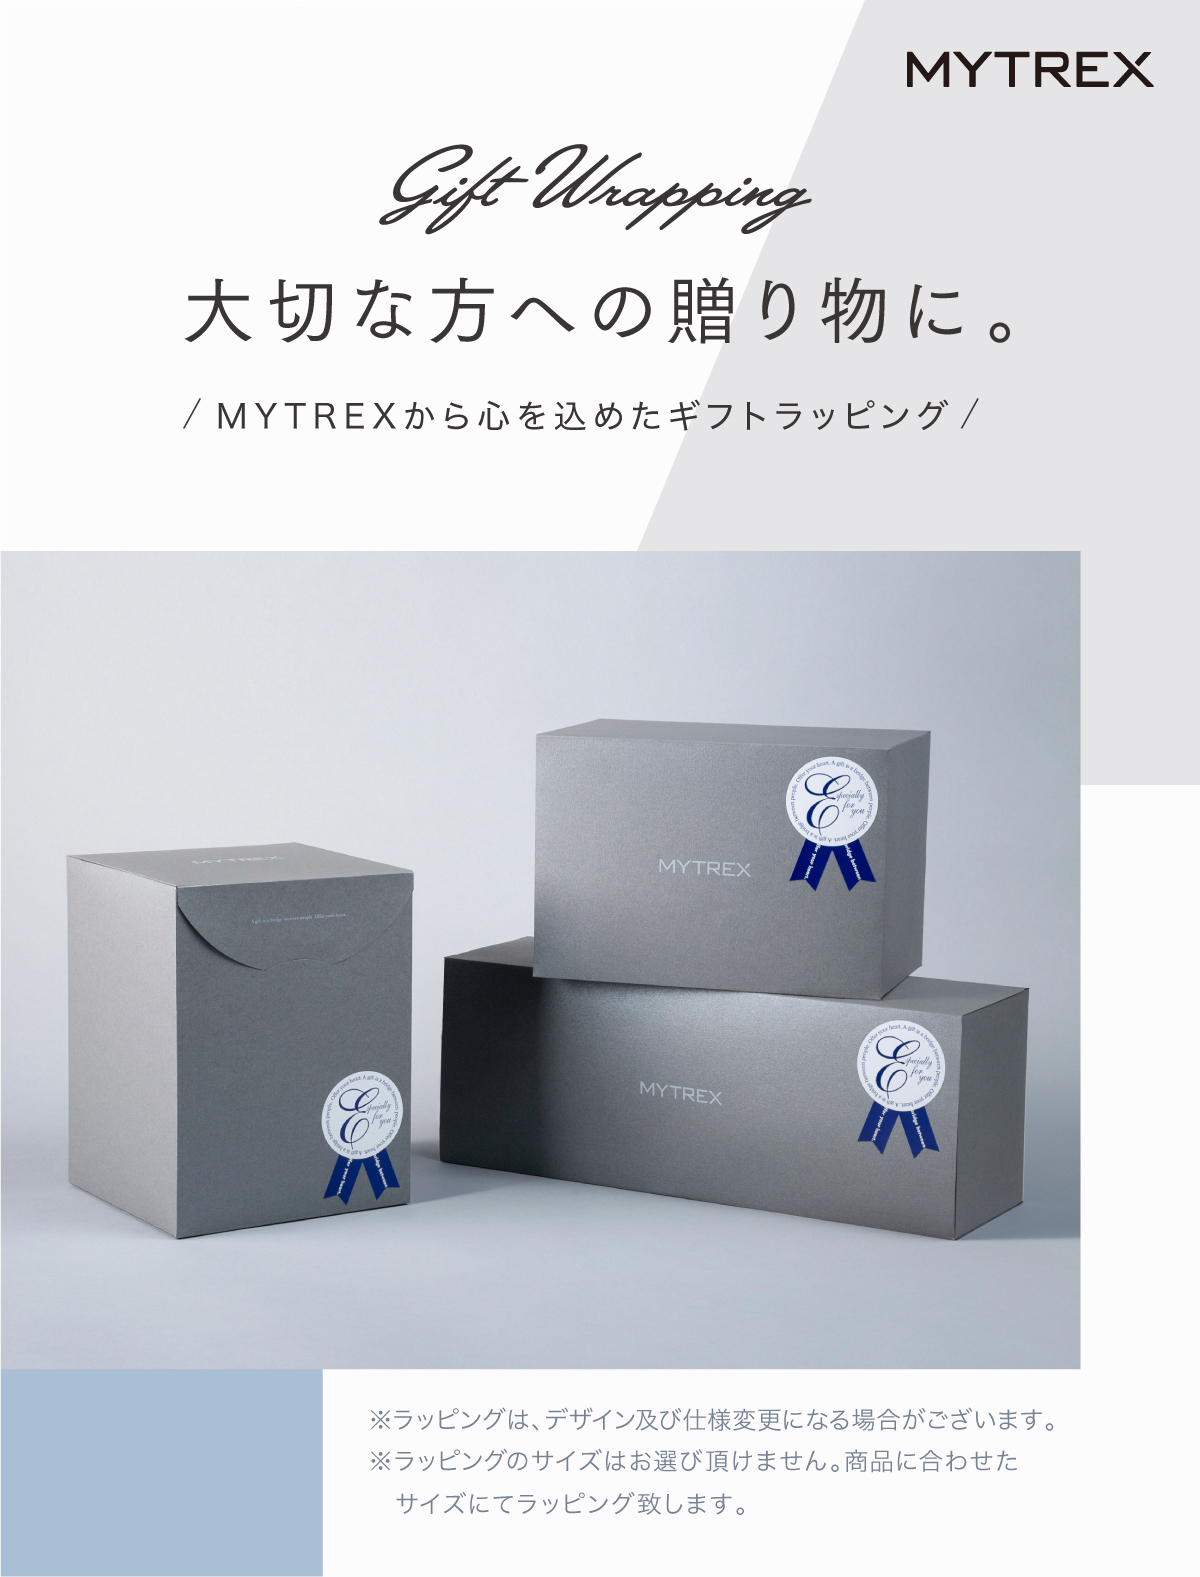 Gift Wrapping – MYTREX専用ギフトラッピングボックス — MYTREX